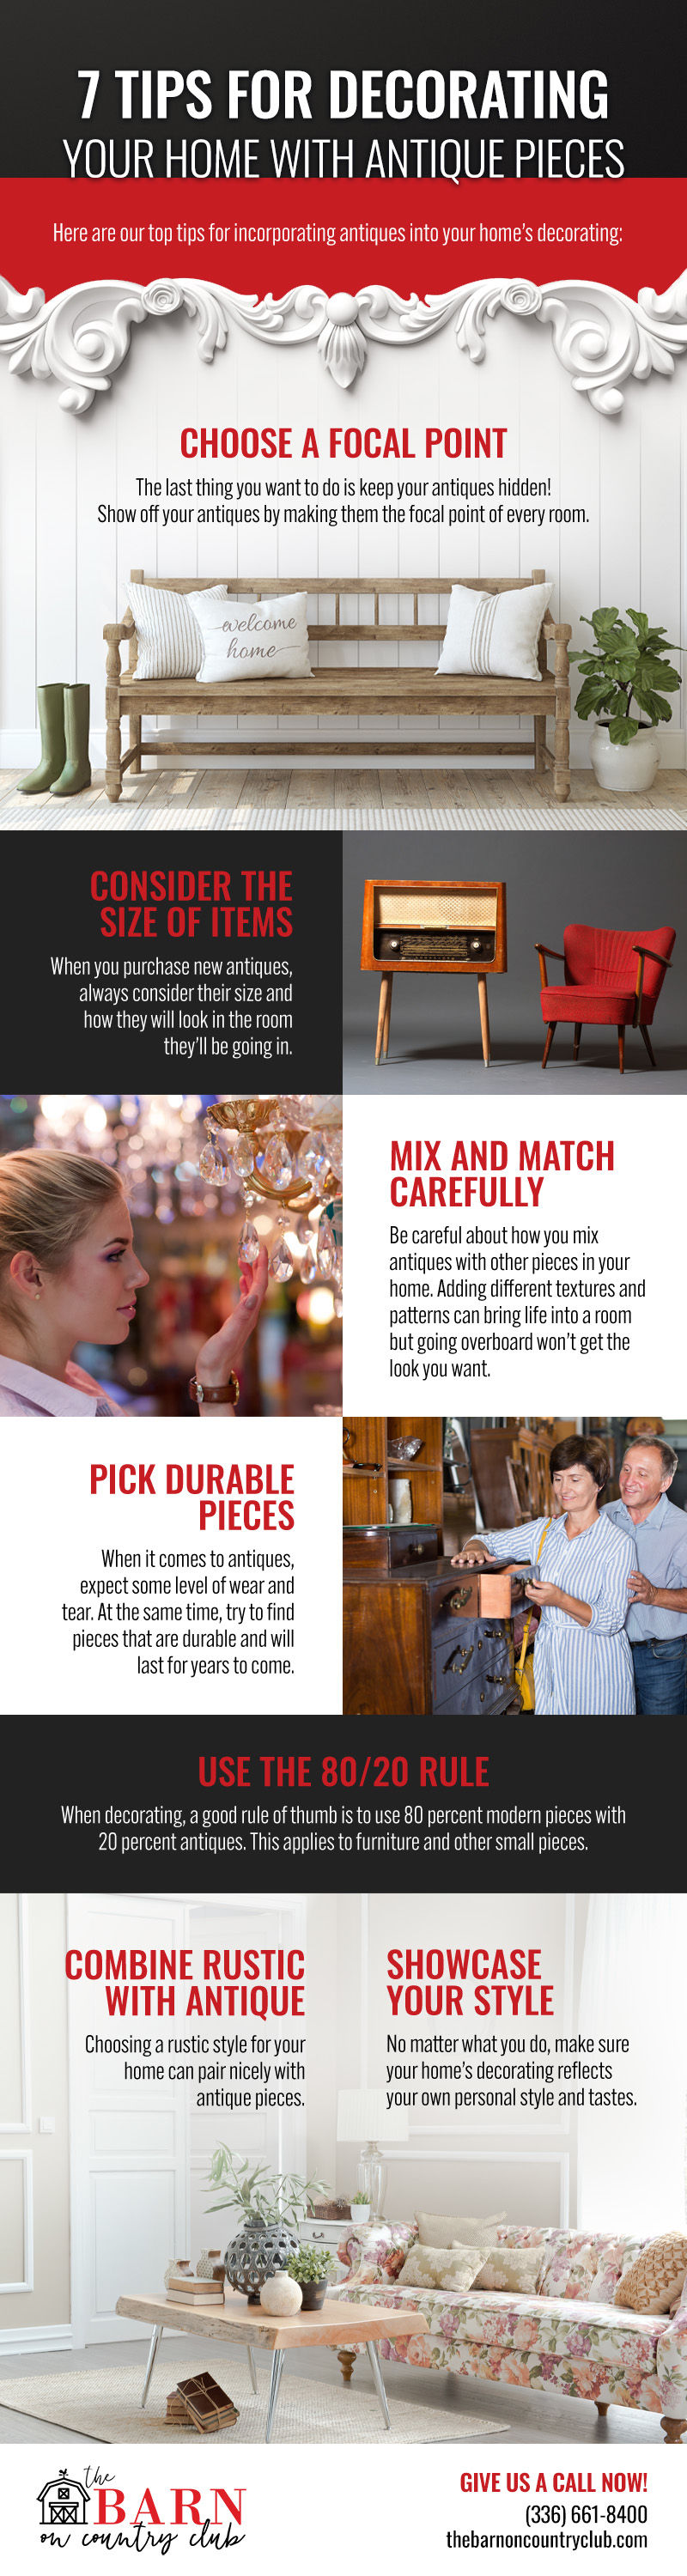 7 Tips for Decorating Your Home with Antique Pieces [infographic]